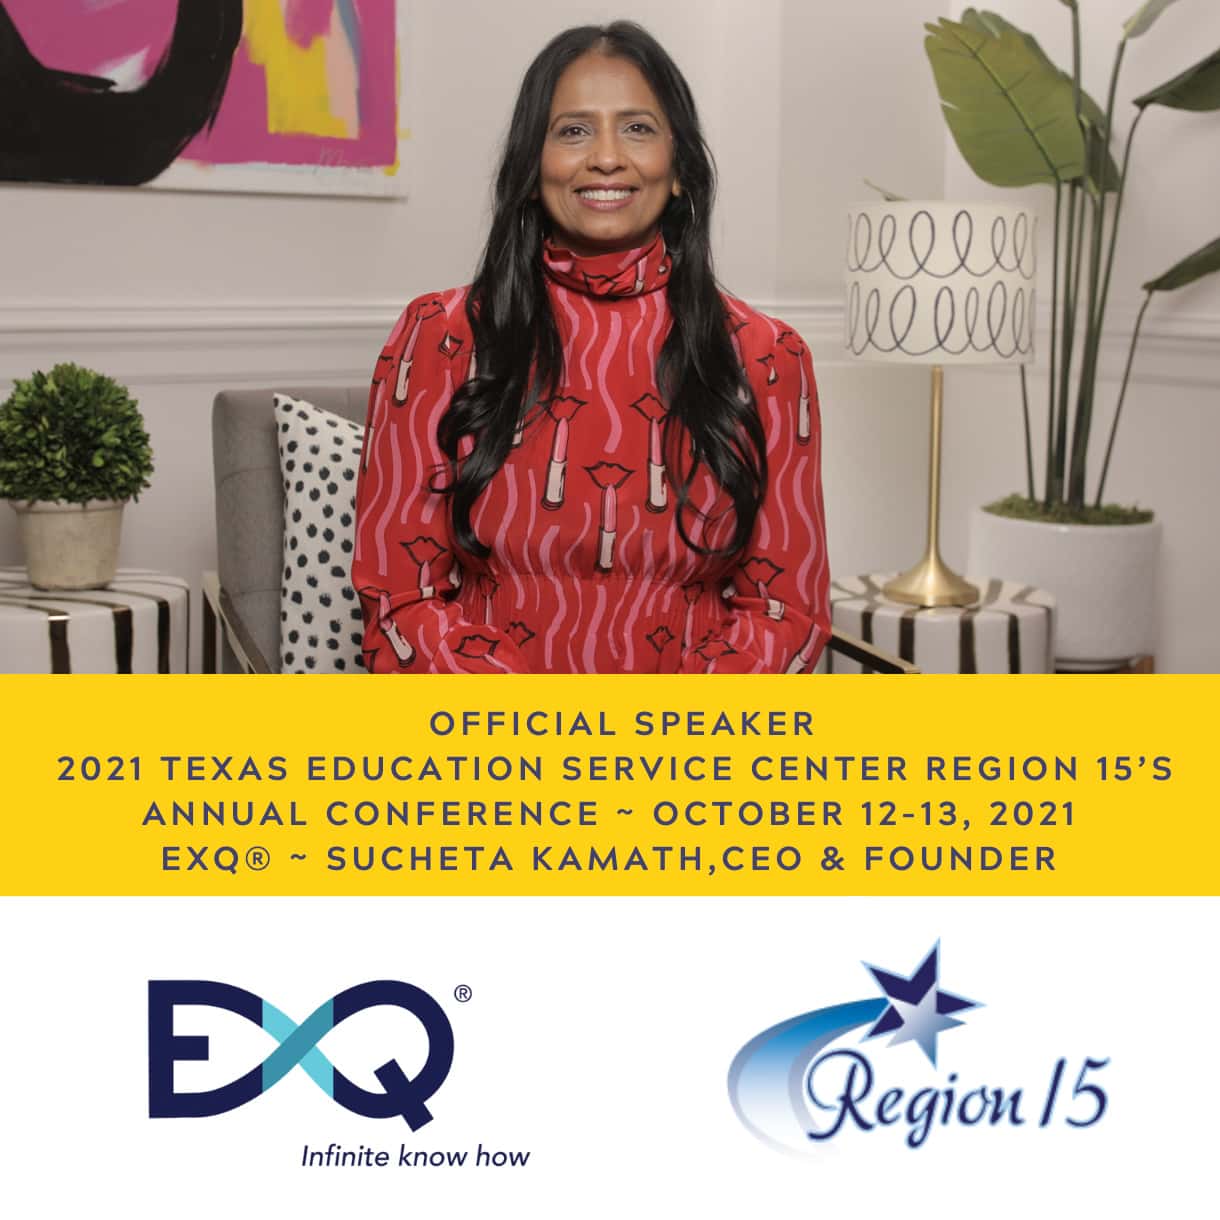 Texas Education Service Center Region 15’s Annual Conference 2021